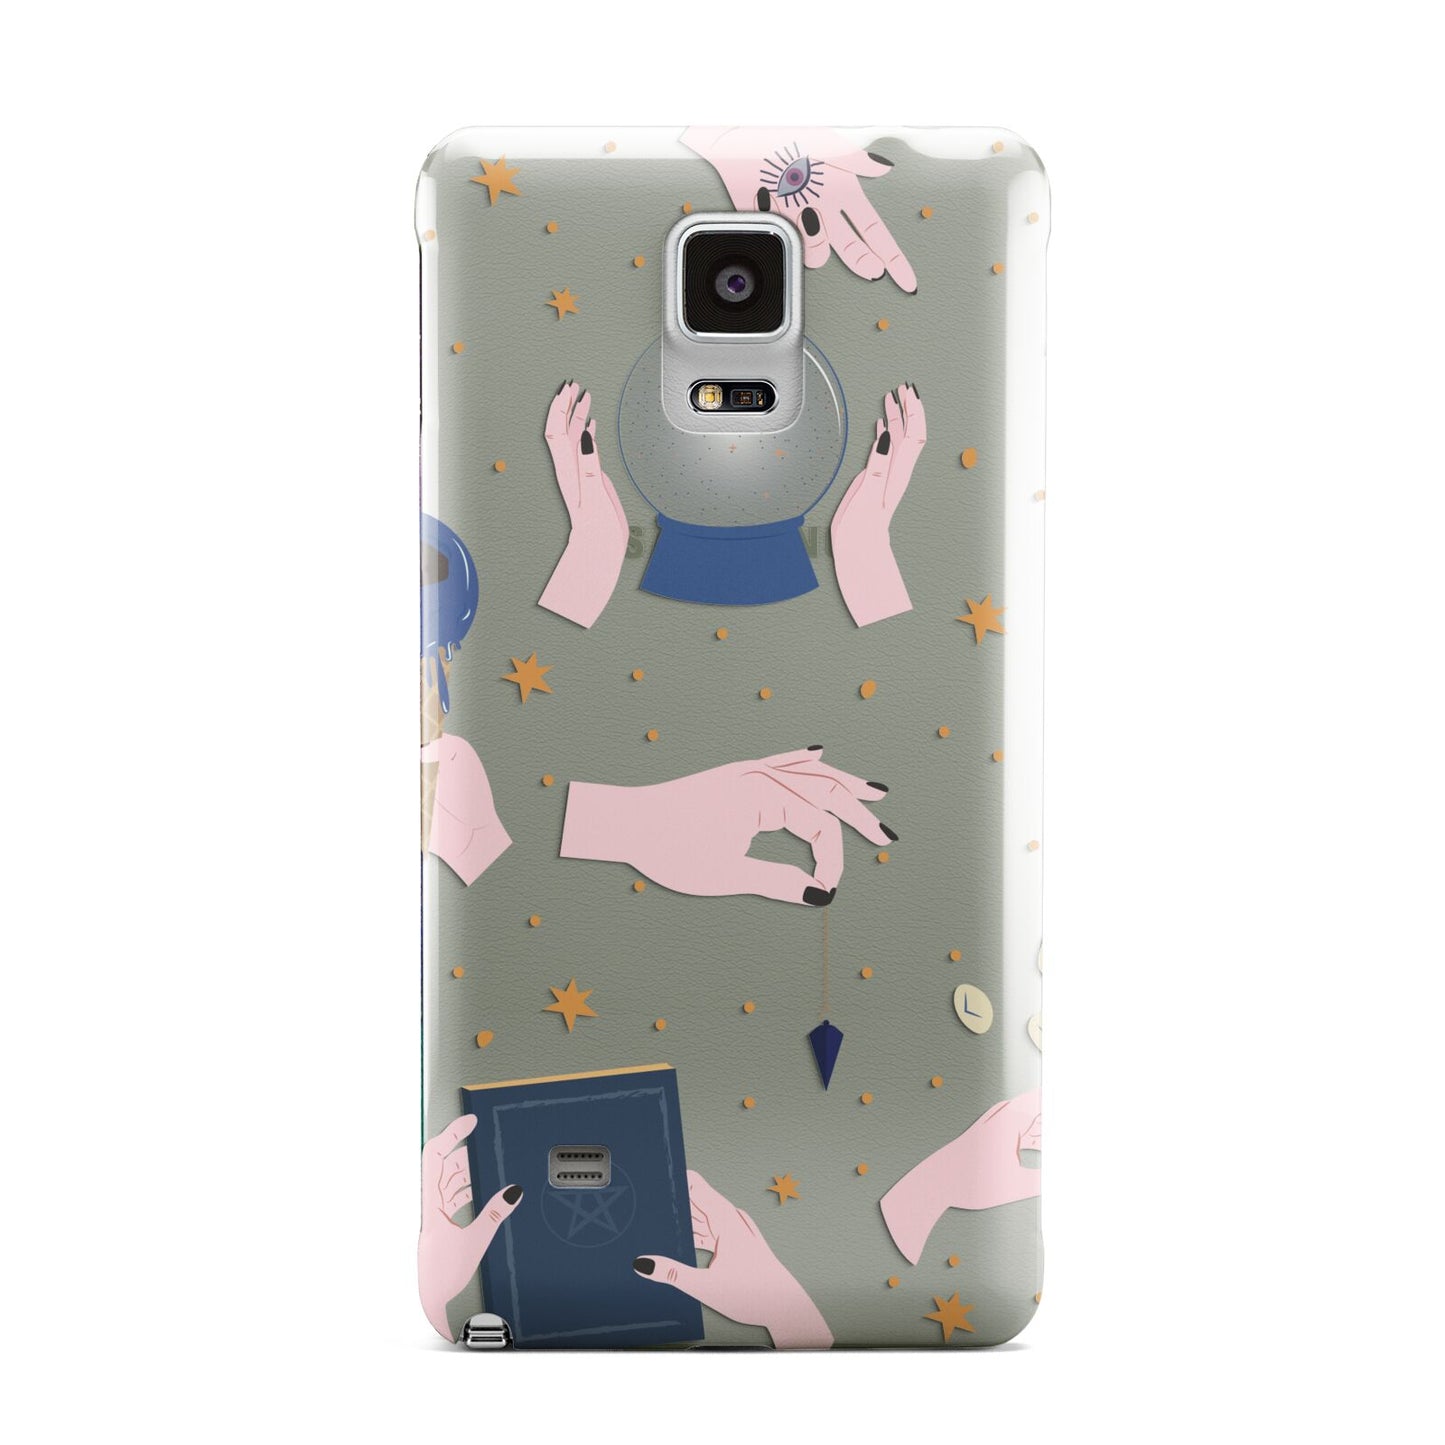 Clairvoyant Witches Hands Samsung Galaxy Note 4 Case